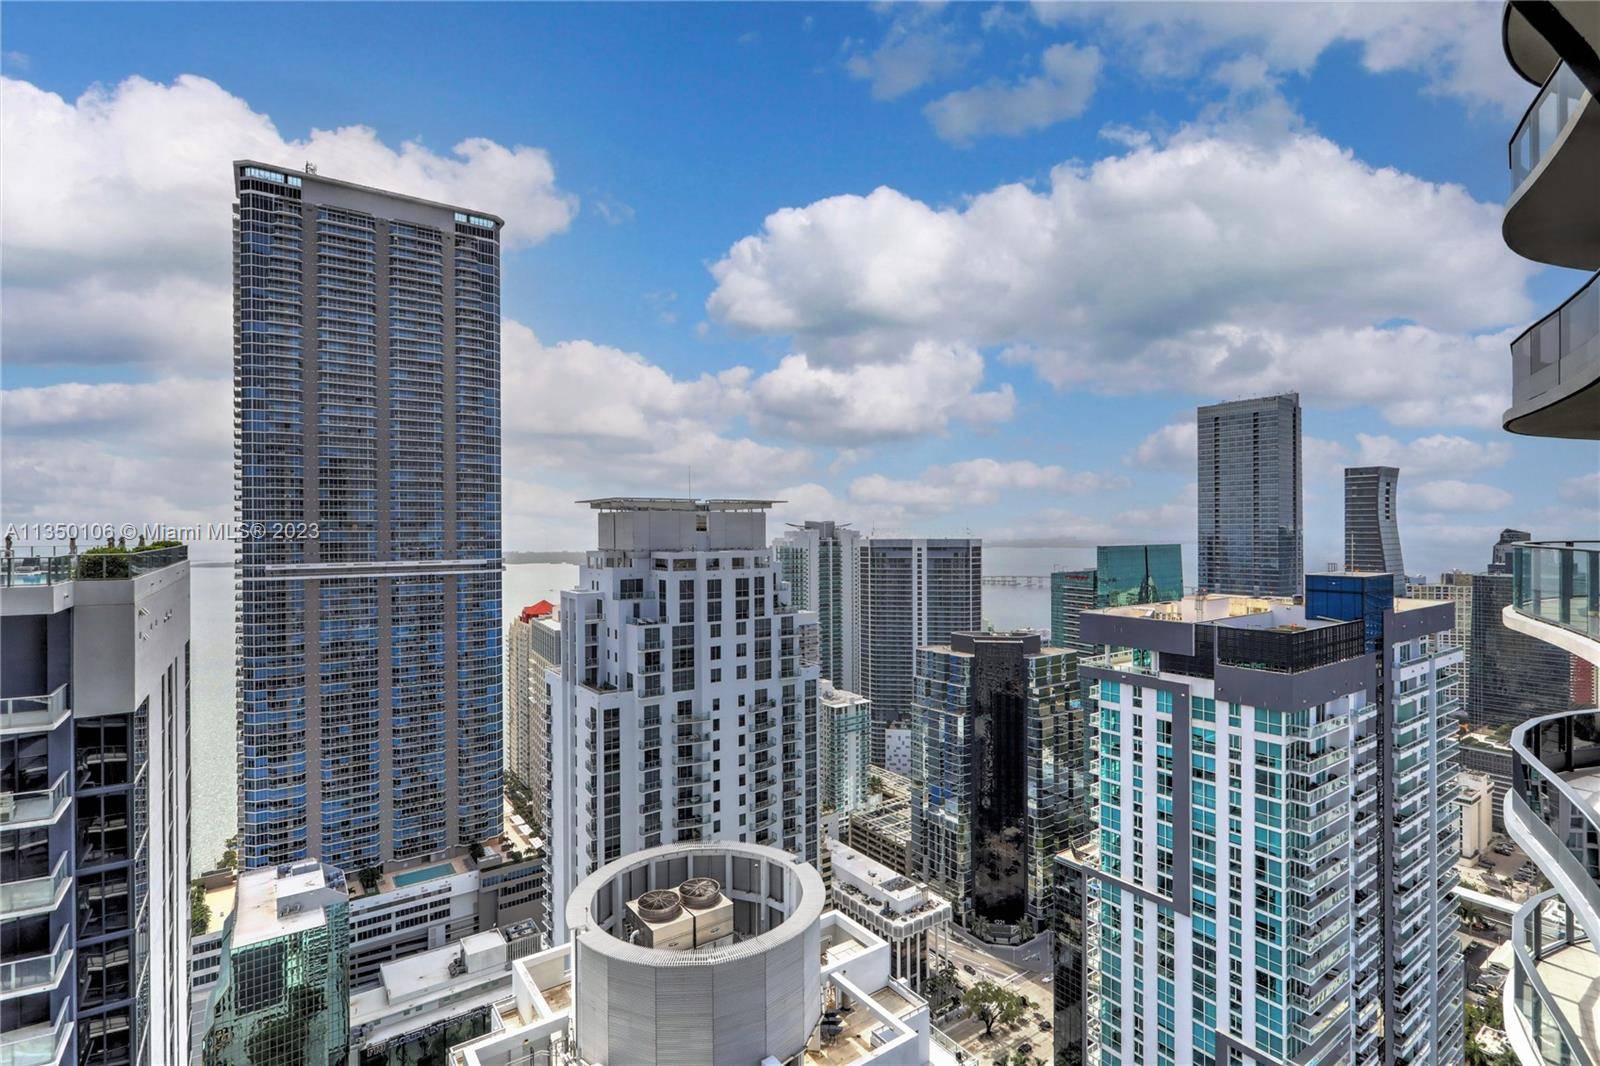 Spectacular penthouse in Brickell Flatiron, still the newest building in Brickell developed by Ugo Colombo.